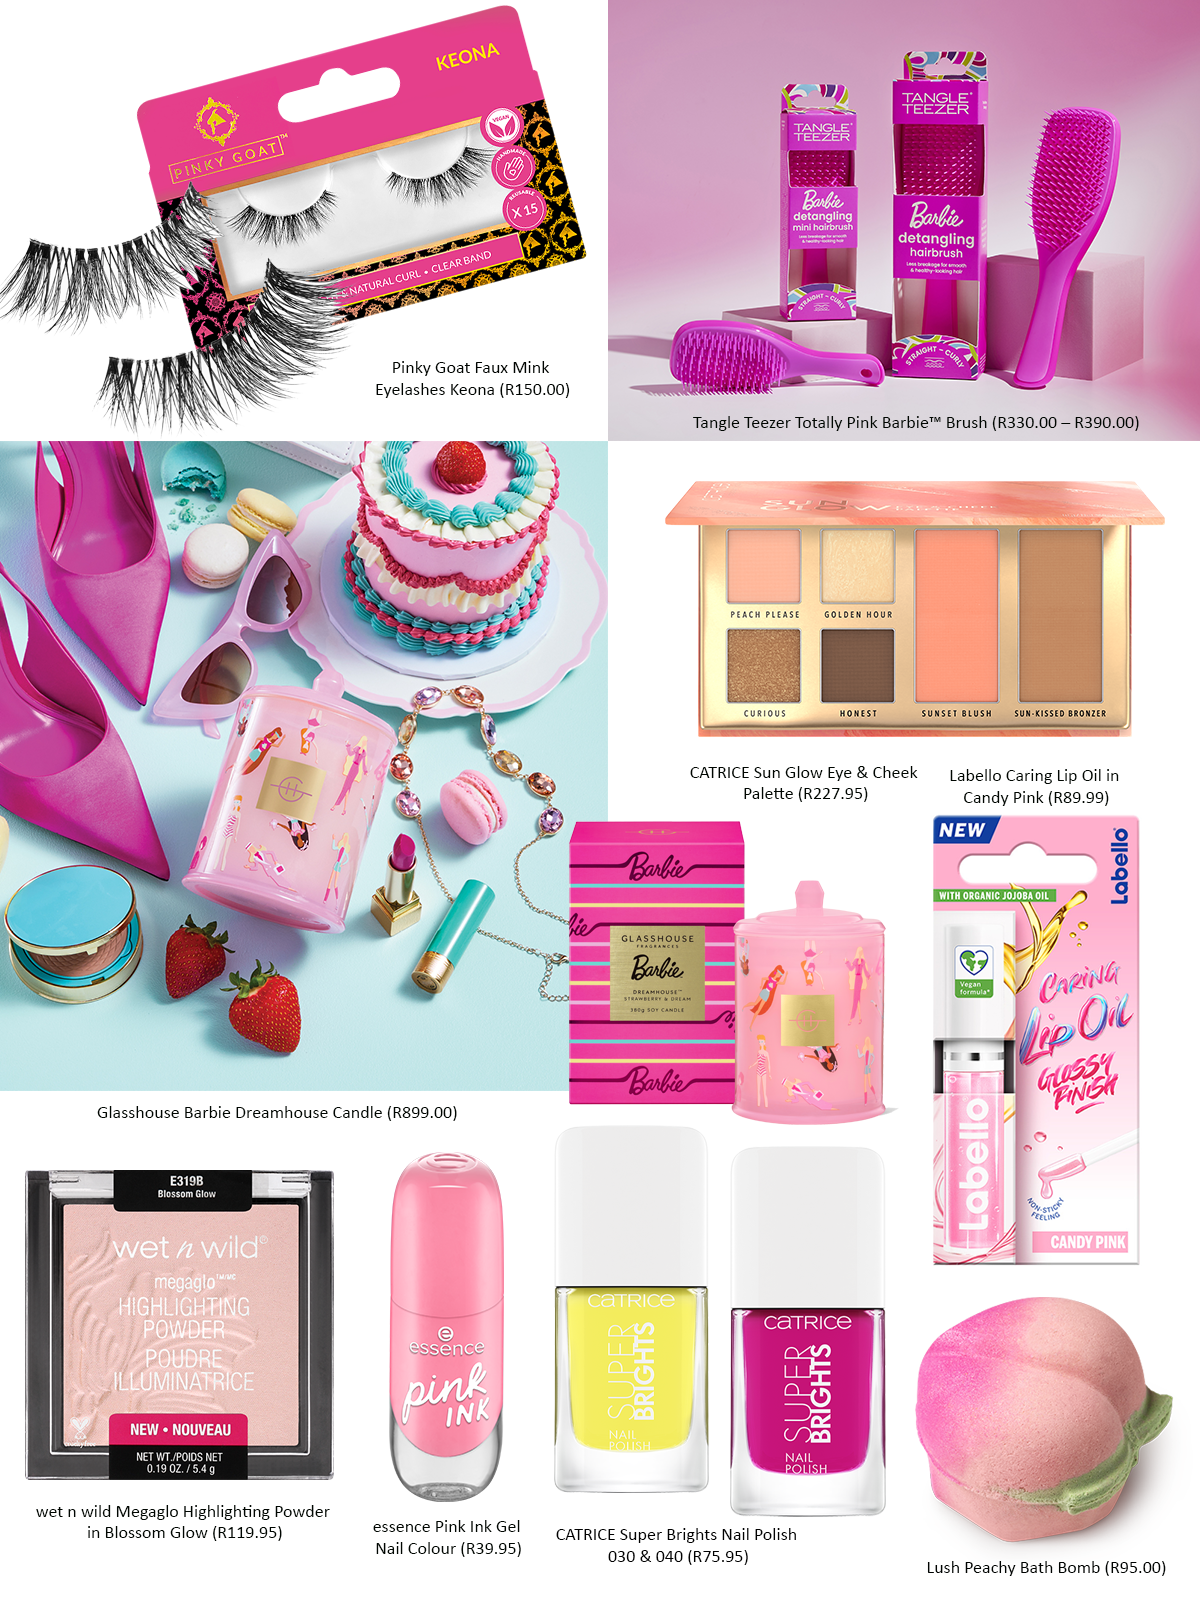 It’s Barbie week! Here’s our round-up of Barbie-worthy beauty products to get you in the mood 1